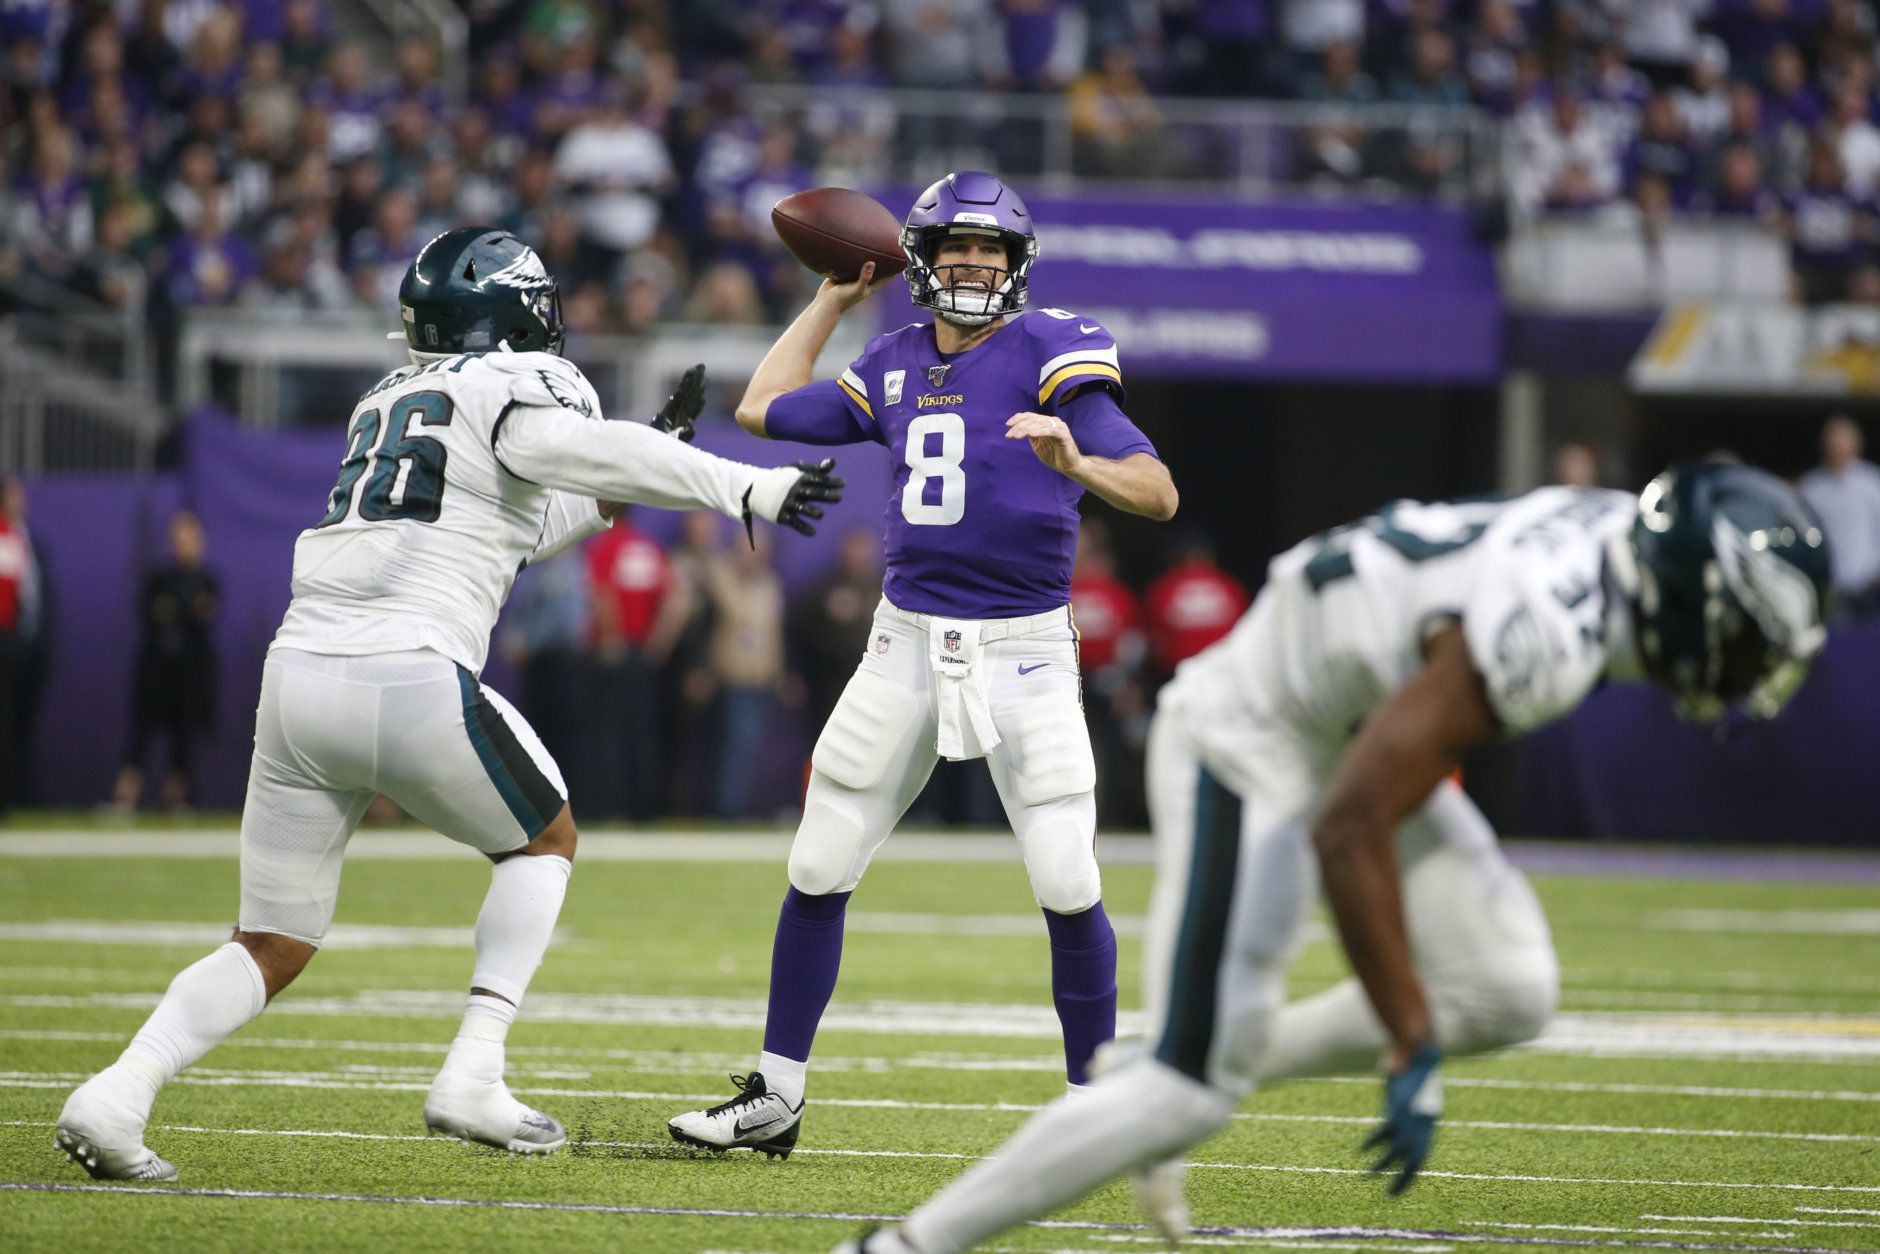 <p><b><i>Eagles 20</i></b><br />
<b><i>Vikings 38</i></b></p>
<p>Given the difference between what Zach Brown had to say about Kirk Cousins <a href="https://profootballtalk.nbcsports.com/2019/10/11/zach-brown-trashes-kirk-cousins-ahead-of-sundays-game/" target="_blank" rel="noopener" data-saferedirecturl="https://www.google.com/url?q=https://profootballtalk.nbcsports.com/2019/10/11/zach-brown-trashes-kirk-cousins-ahead-of-sundays-game/&amp;source=gmail&amp;ust=1571101182804000&amp;usg=AFQjCNGx4NNcj9uon8gBdTy20cQRZeqkFw">before</a> this game and <a href="https://profootballtalk.nbcsports.com/2019/10/13/zach-brown-doesnt-want-to-talk-about-kirk-cousins/" target="_blank" rel="noopener" data-saferedirecturl="https://www.google.com/url?q=https://profootballtalk.nbcsports.com/2019/10/13/zach-brown-doesnt-want-to-talk-about-kirk-cousins/&amp;source=gmail&amp;ust=1571101182804000&amp;usg=AFQjCNFWiAu0i0ZWSo3vzyryQGauTw87Mw">after</a>, I shall heretofore refer to Brown as Smokey because this felt a lot like <a href="https://www.youtube.com/watch?v=Kw31fE_AWsI" target="_blank" rel="noopener" data-saferedirecturl="https://www.google.com/url?q=https://www.youtube.com/watch?v%3DKw31fE_AWsI&amp;source=gmail&amp;ust=1571101182804000&amp;usg=AFQjCNF09WA4twTkBpxtxjT8KlEwAW57QA">his (NSFW) attitude about Deebo</a>. If Philly misses the playoffs, we&#8217;ll certainly point to this early-season underachieving.</p>
